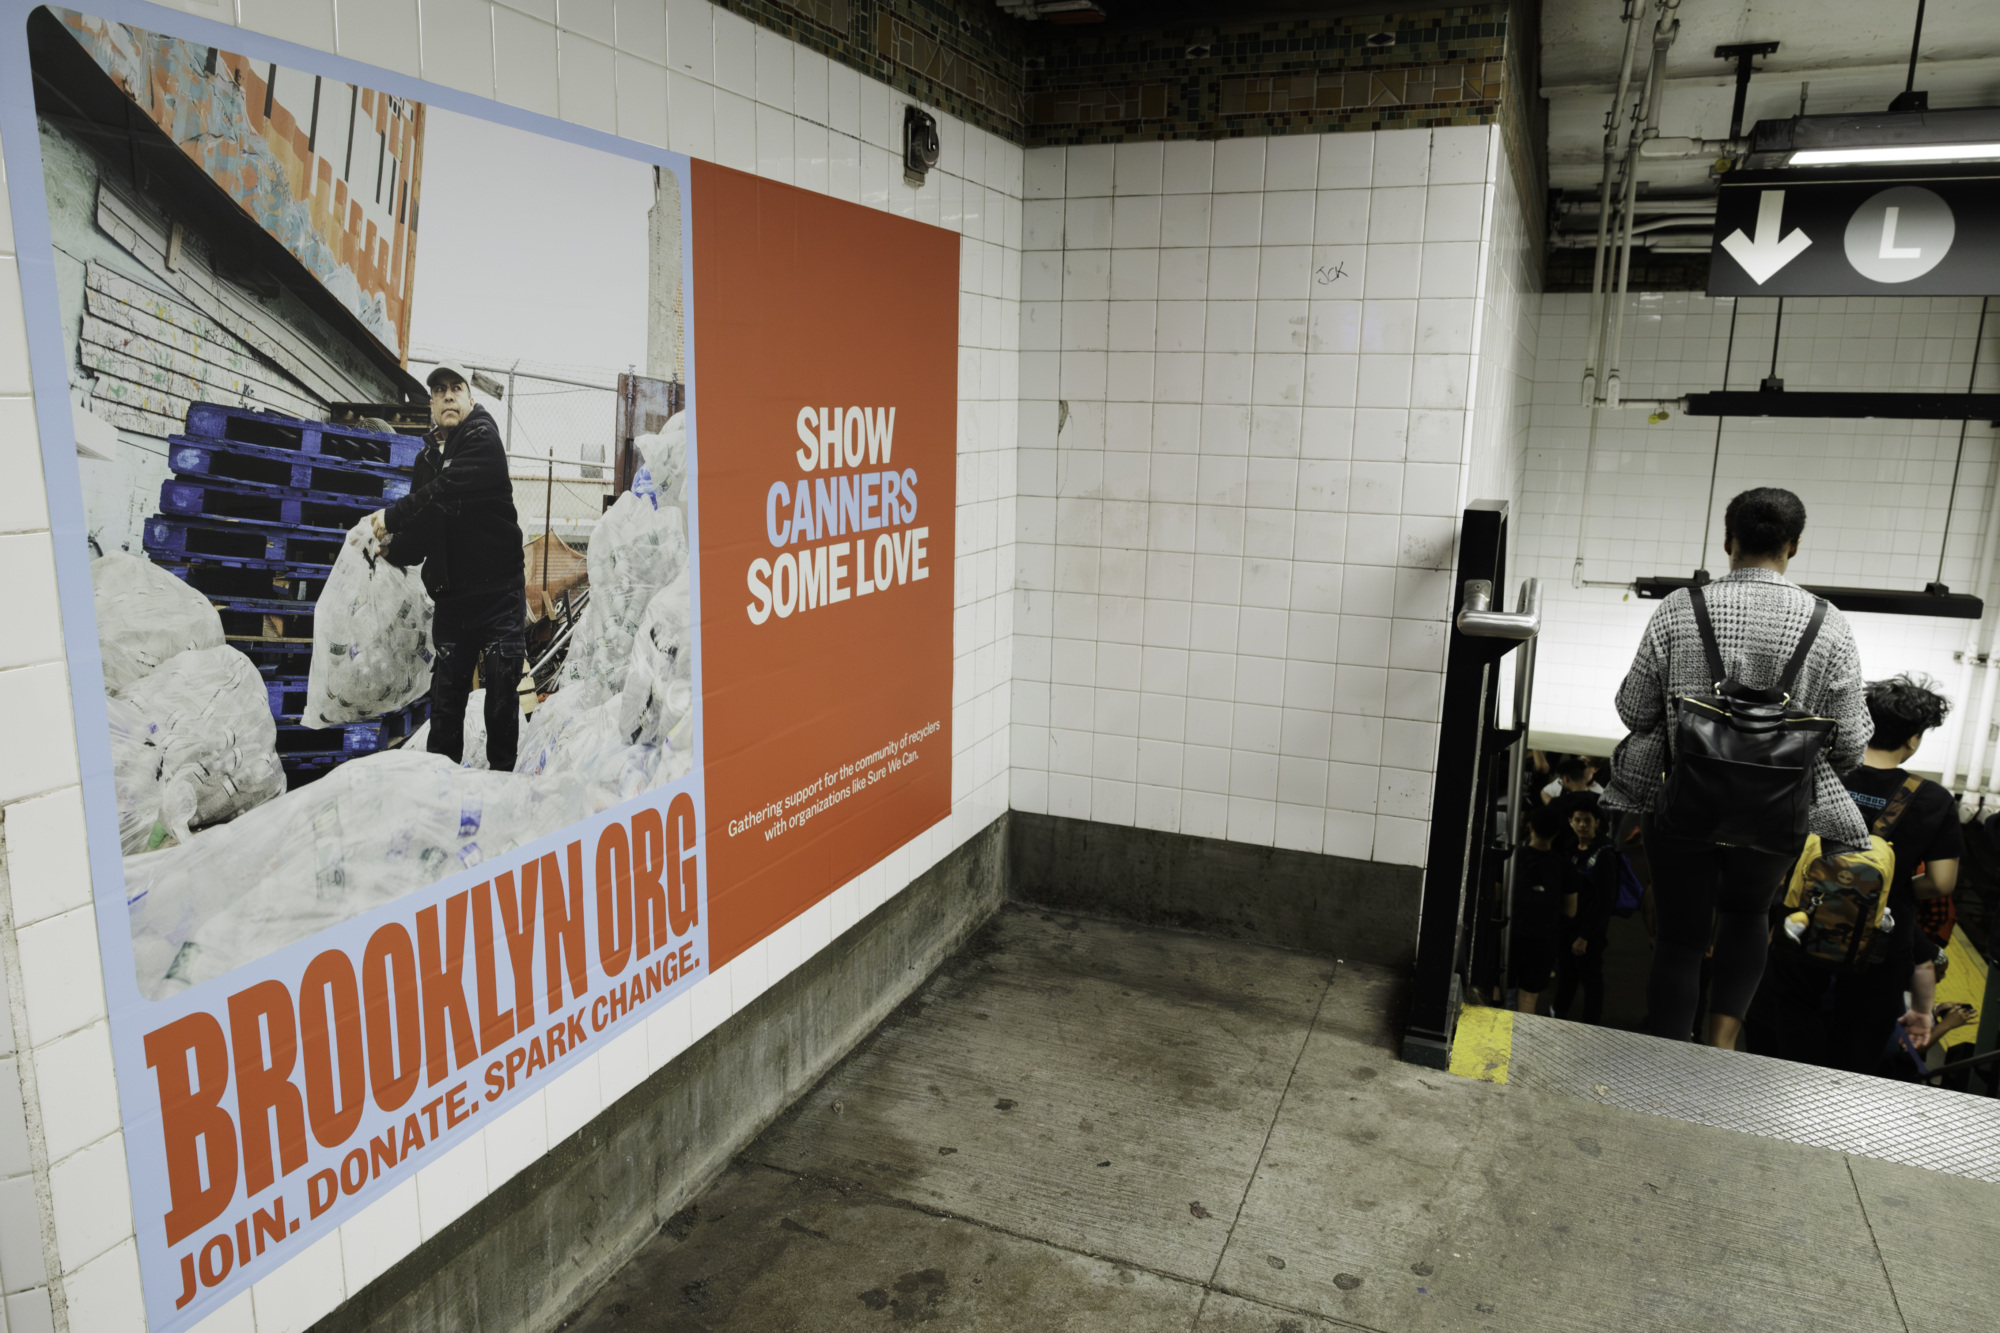 A large poster on a subway wall promotes Brooklyn.org's campaign to support canners. Nearby, commuters descend stairs towards the train platform.